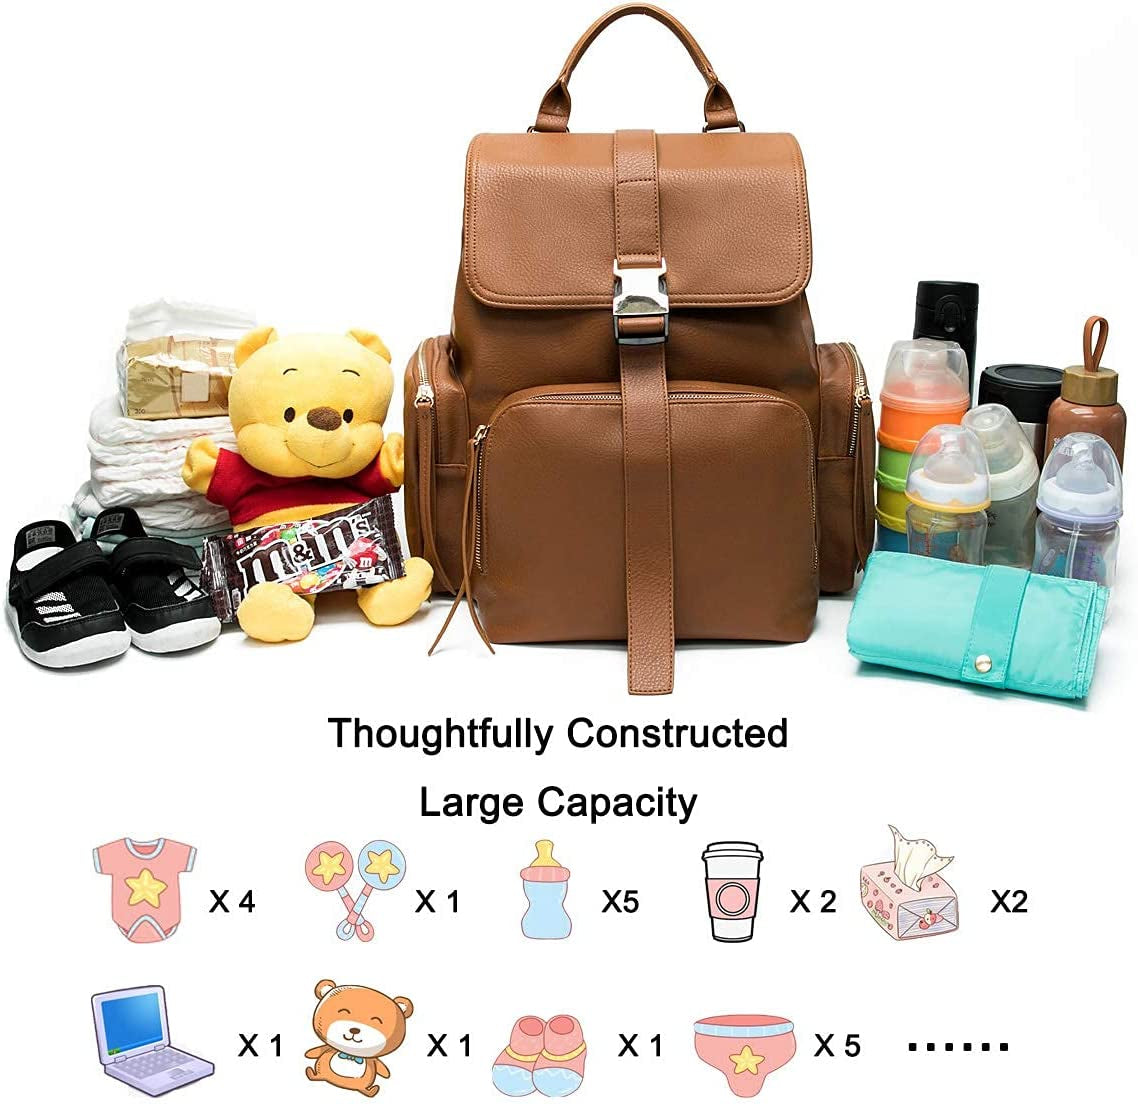 Baby Changing Bag Baby Bag Backpack with Portable Changing Mat & Tableware Holder by Miss Fong Leather Nappy Changing Bag Diaper Bag Travel Rucksack for Mums and Dads